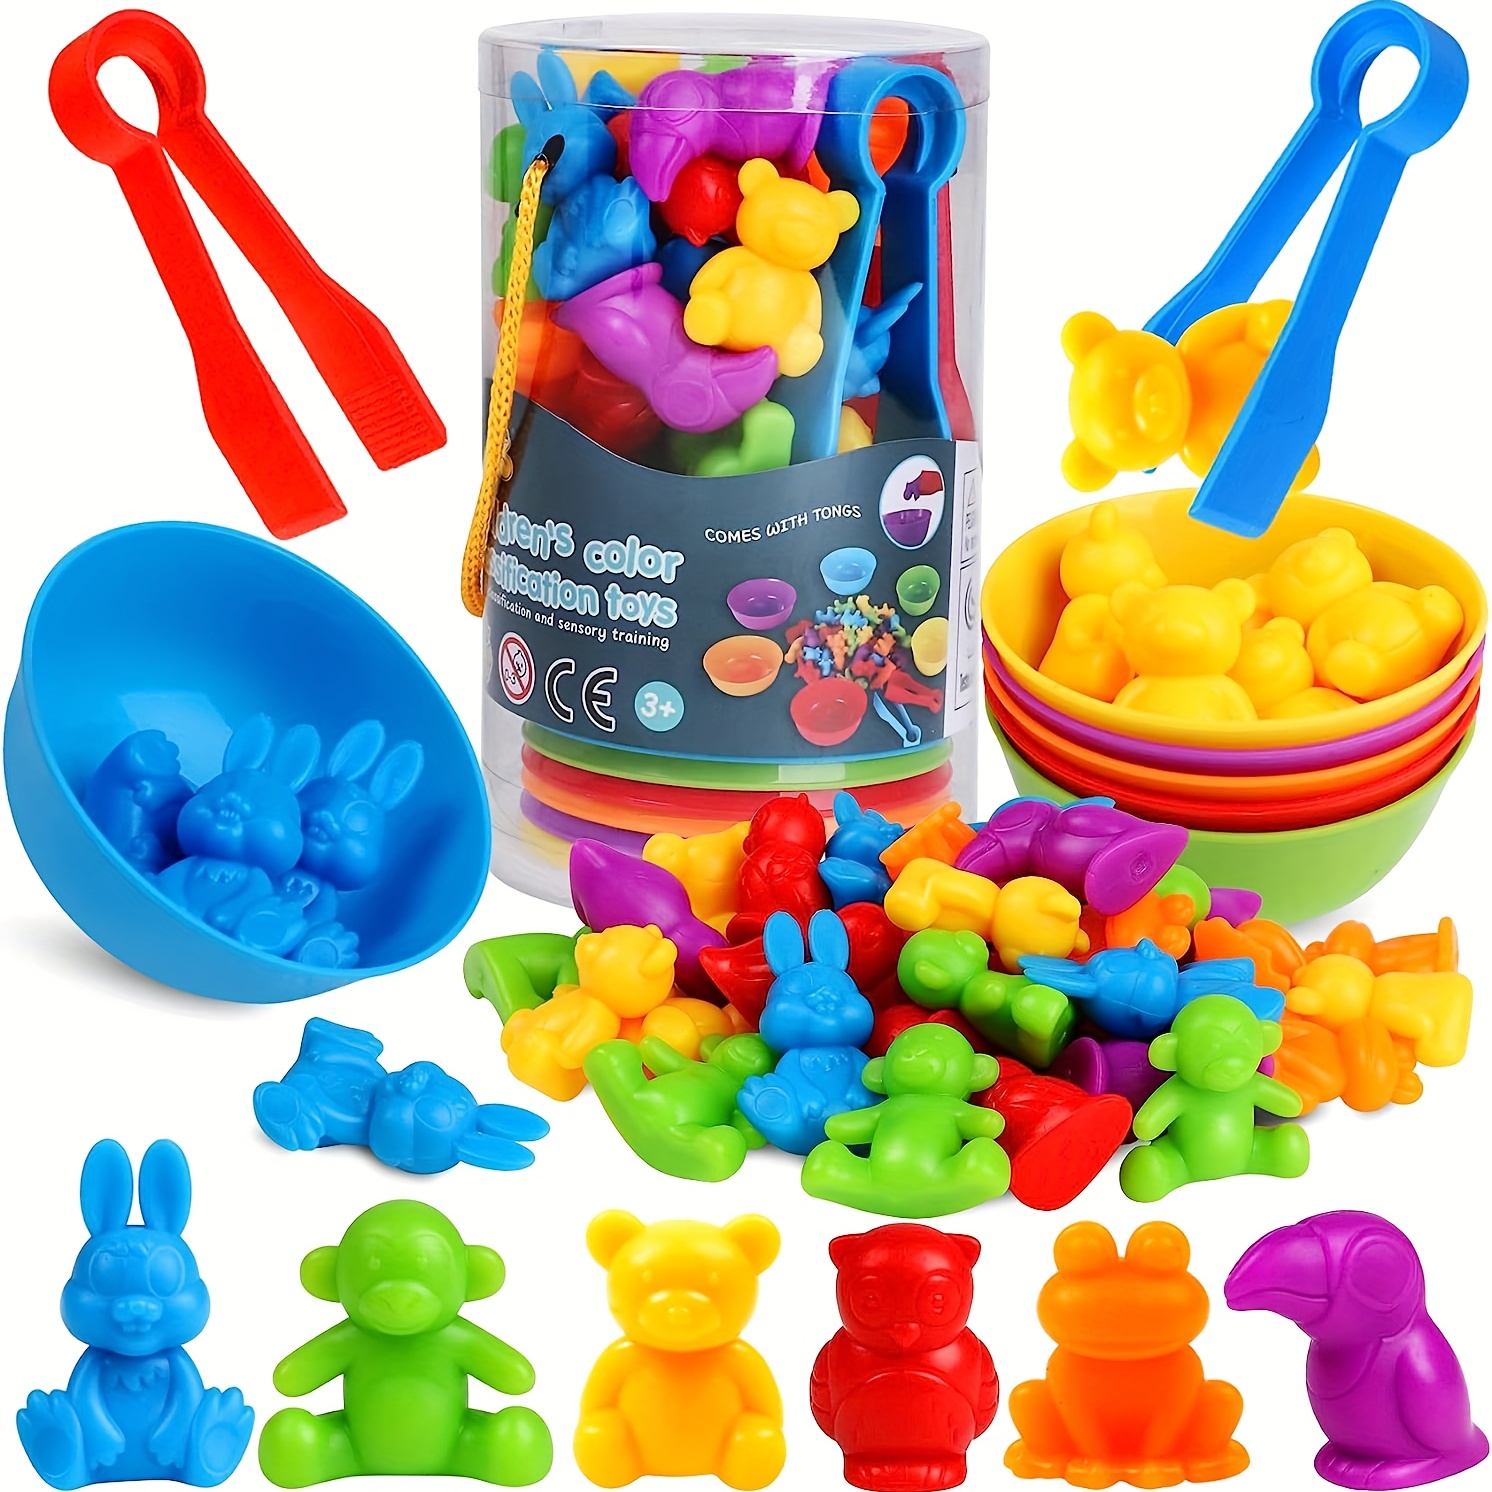 

Counting Toys Matching Games With Sorting Bowls Preschool Learning Activities Sorting Sensory Early Educational Montessori Stem Toy Sets Halloween/thanksgiving Day/christmas Gift Easter Gift